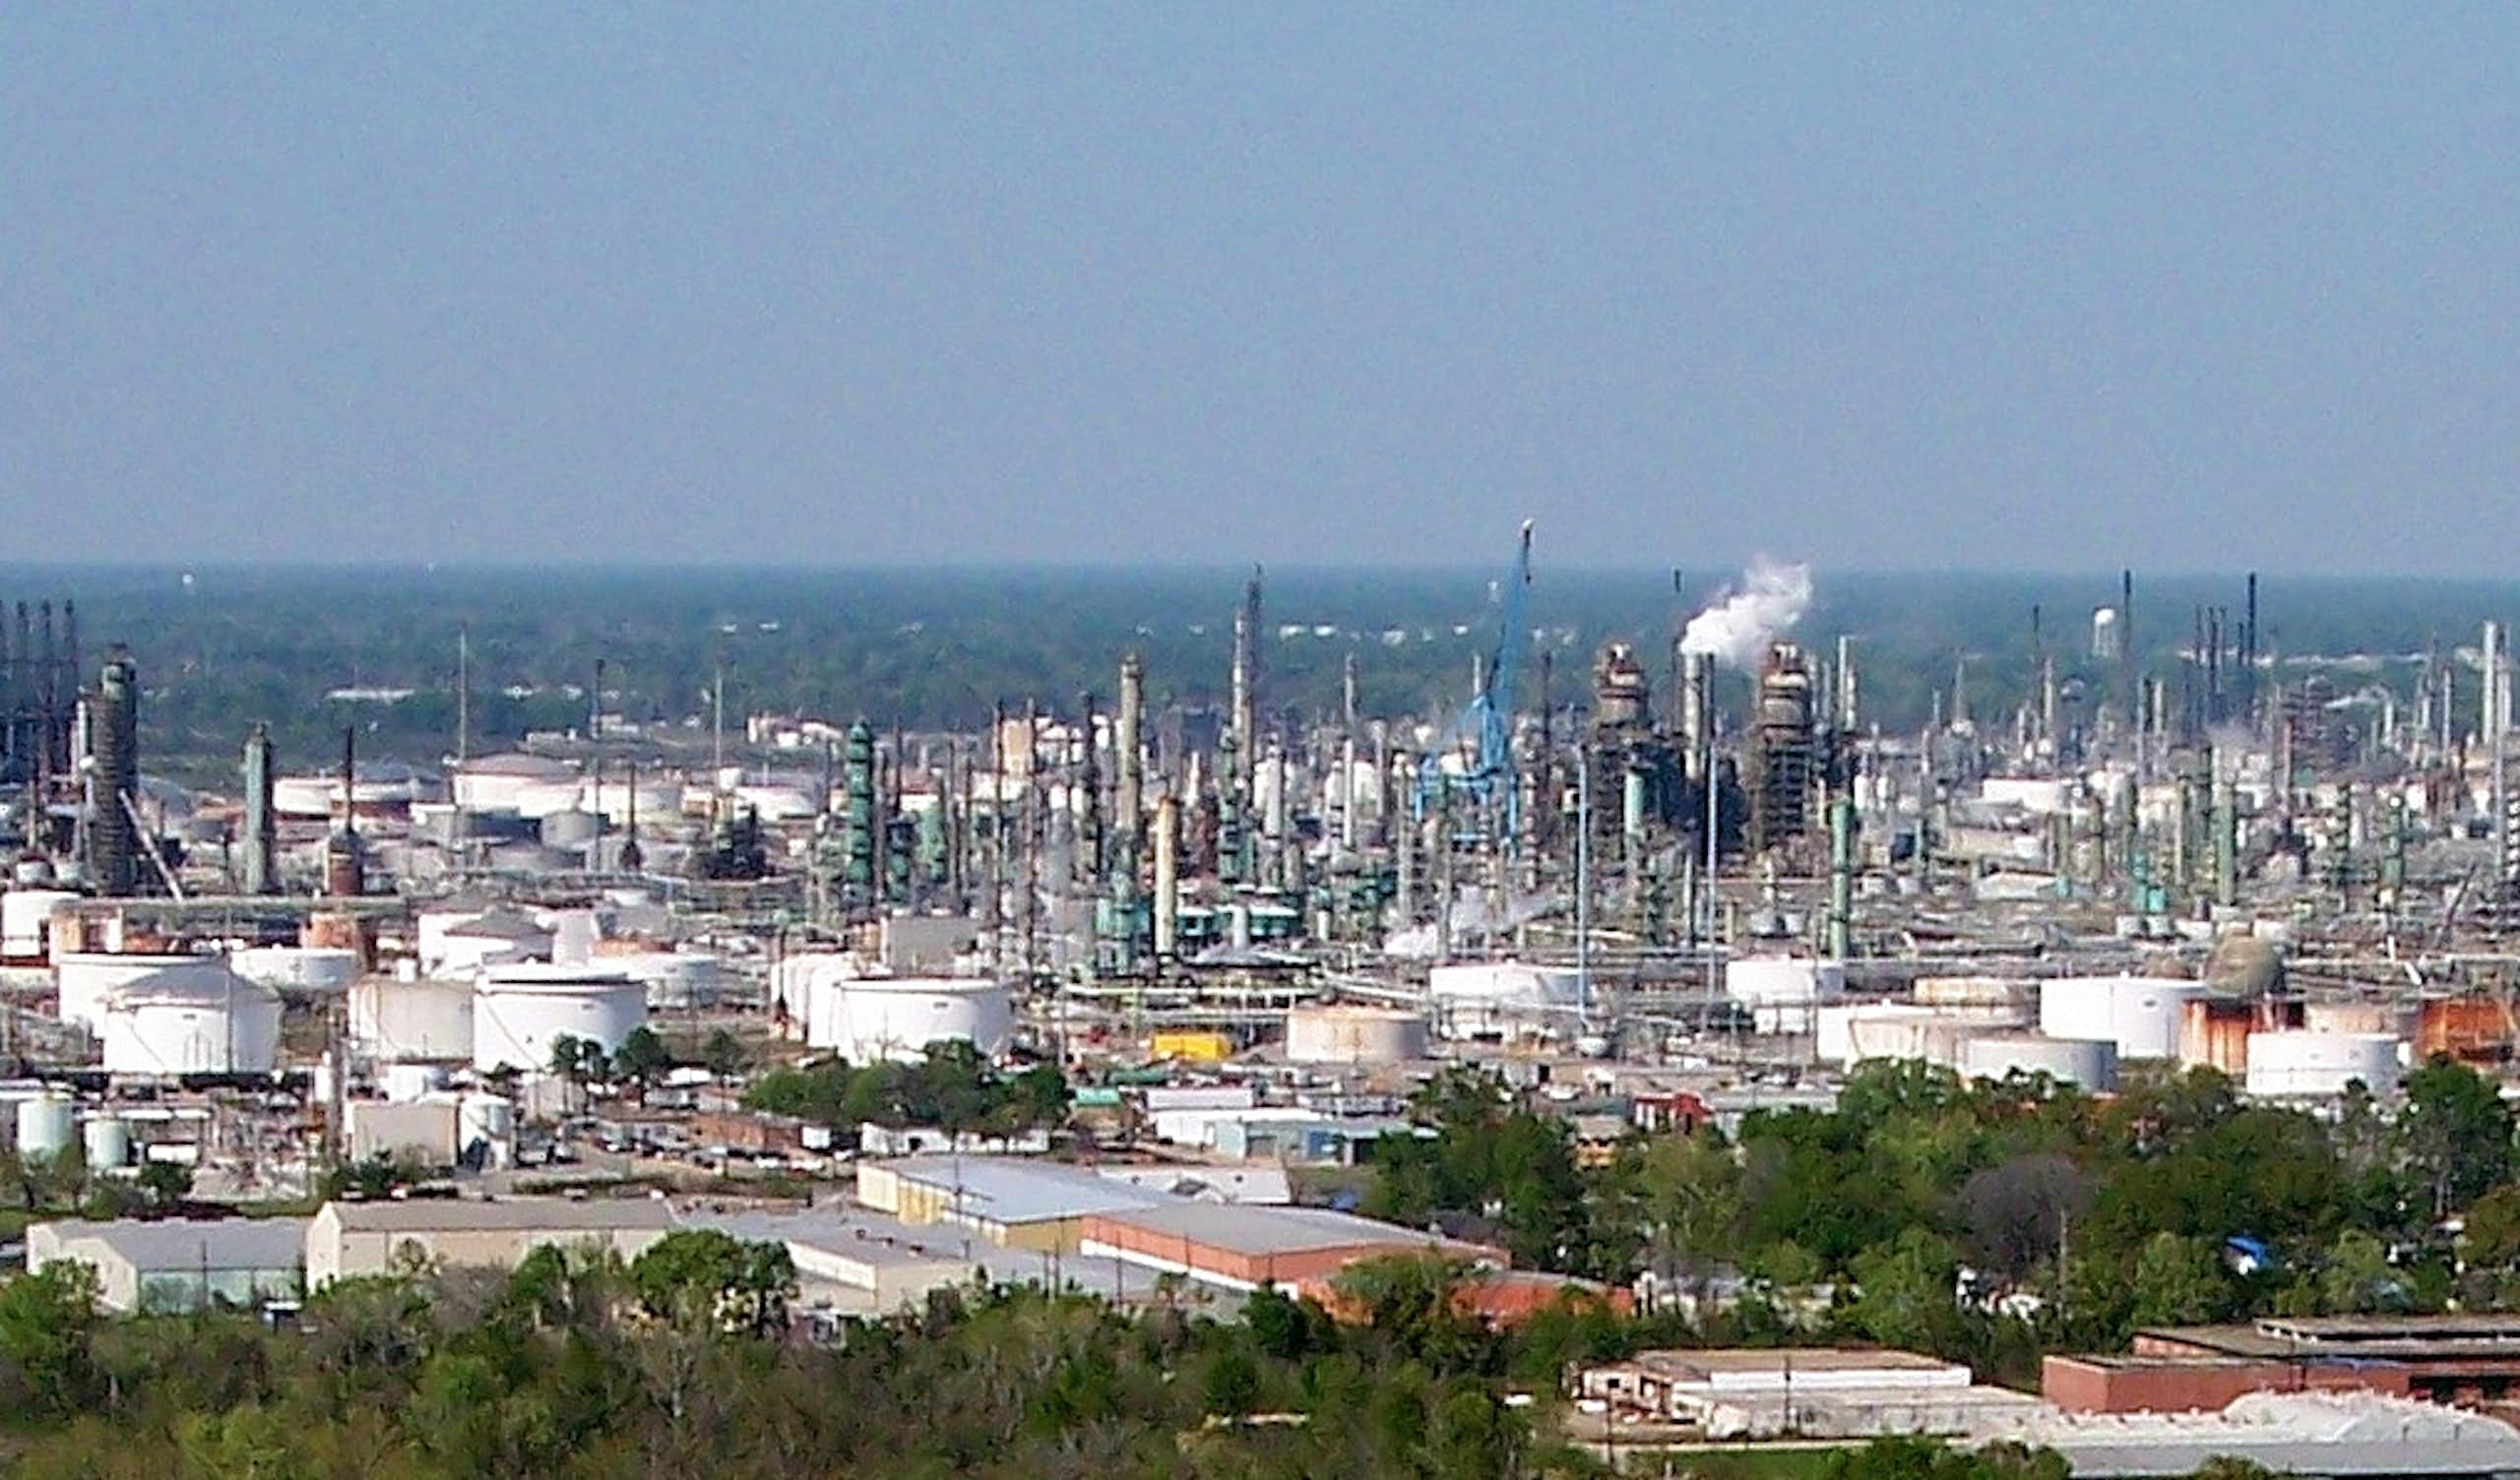 The view of the Exxon refinery from the state capitol.